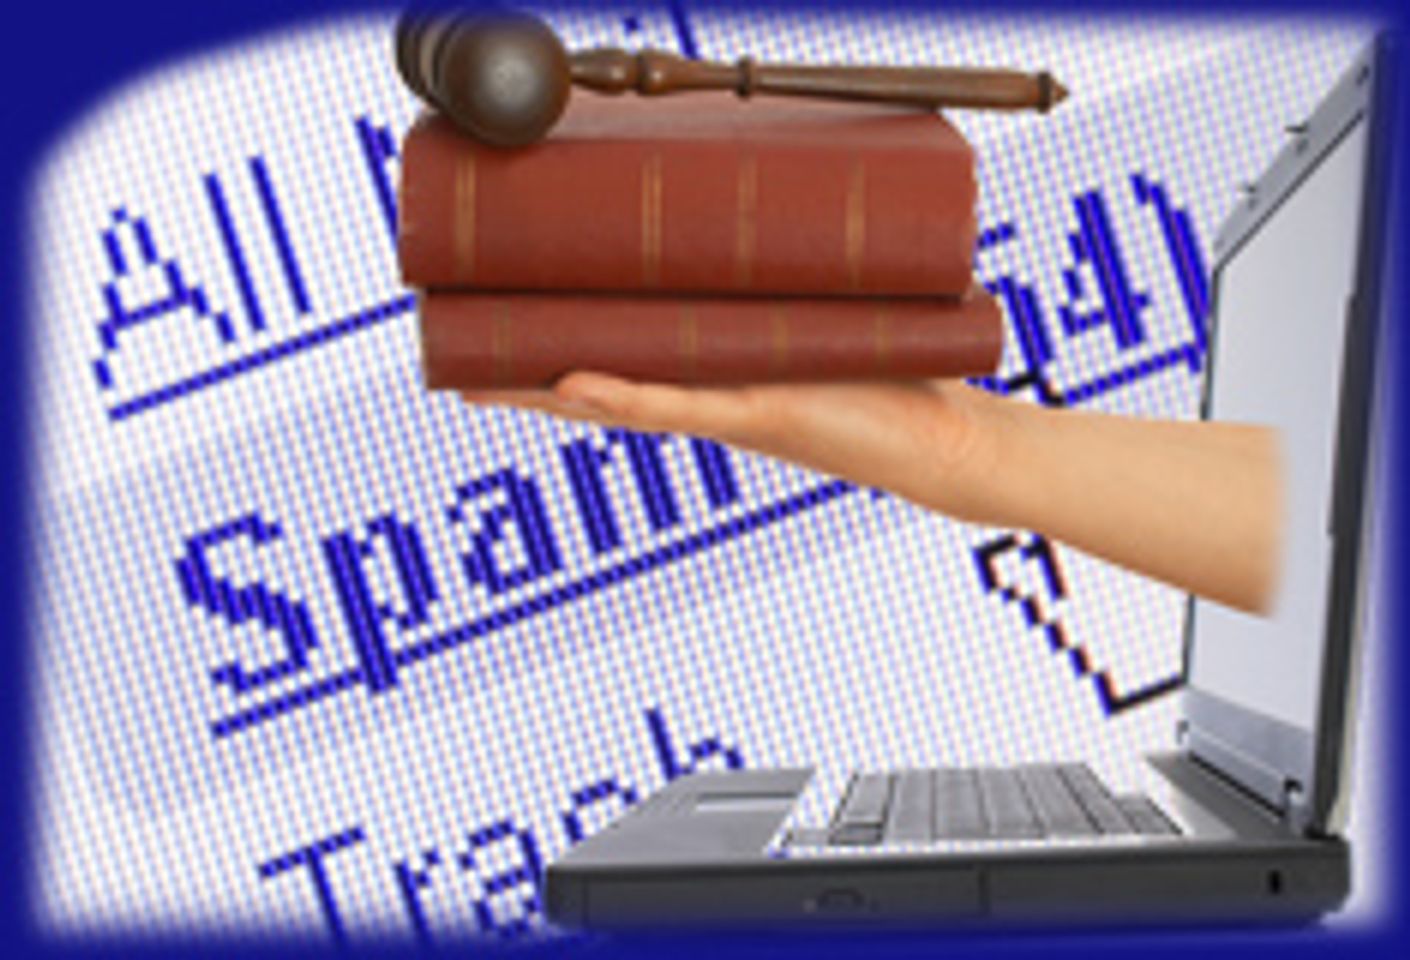 FTC, Adult Site Settle on CAN-SPAM Violations